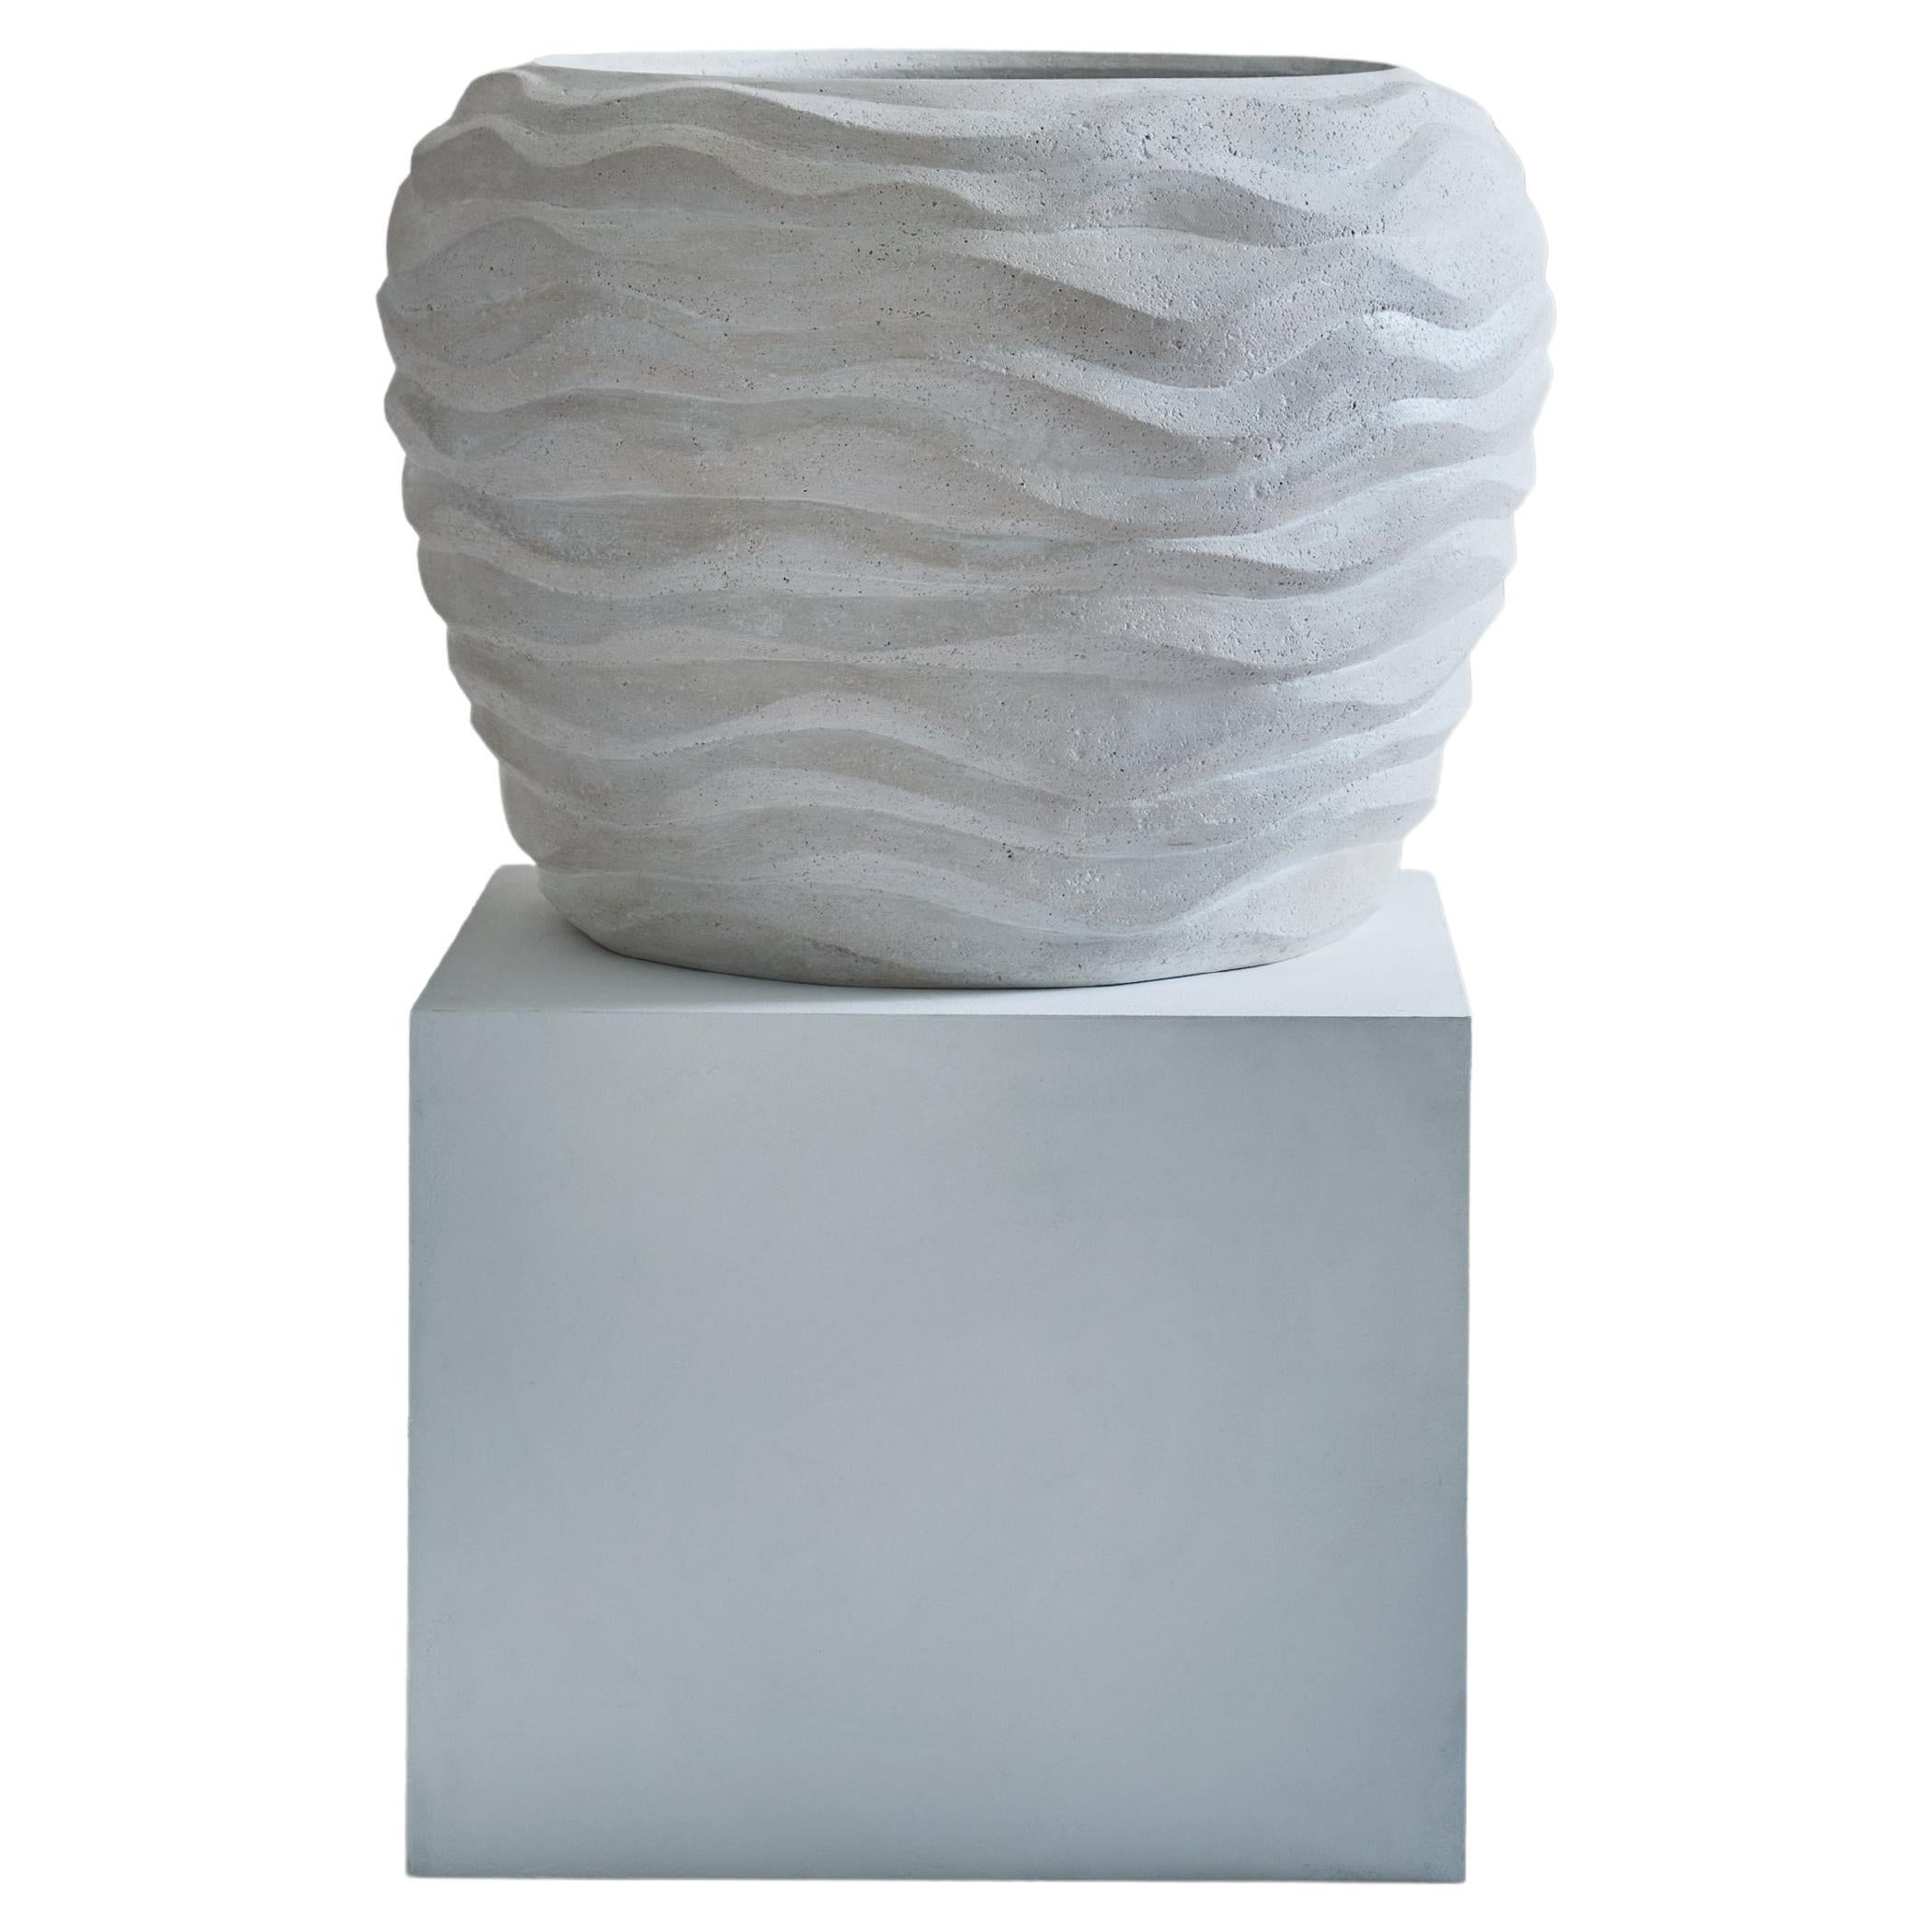 Large White Crushed Limestone & Wood Vessel by Studio Laurence